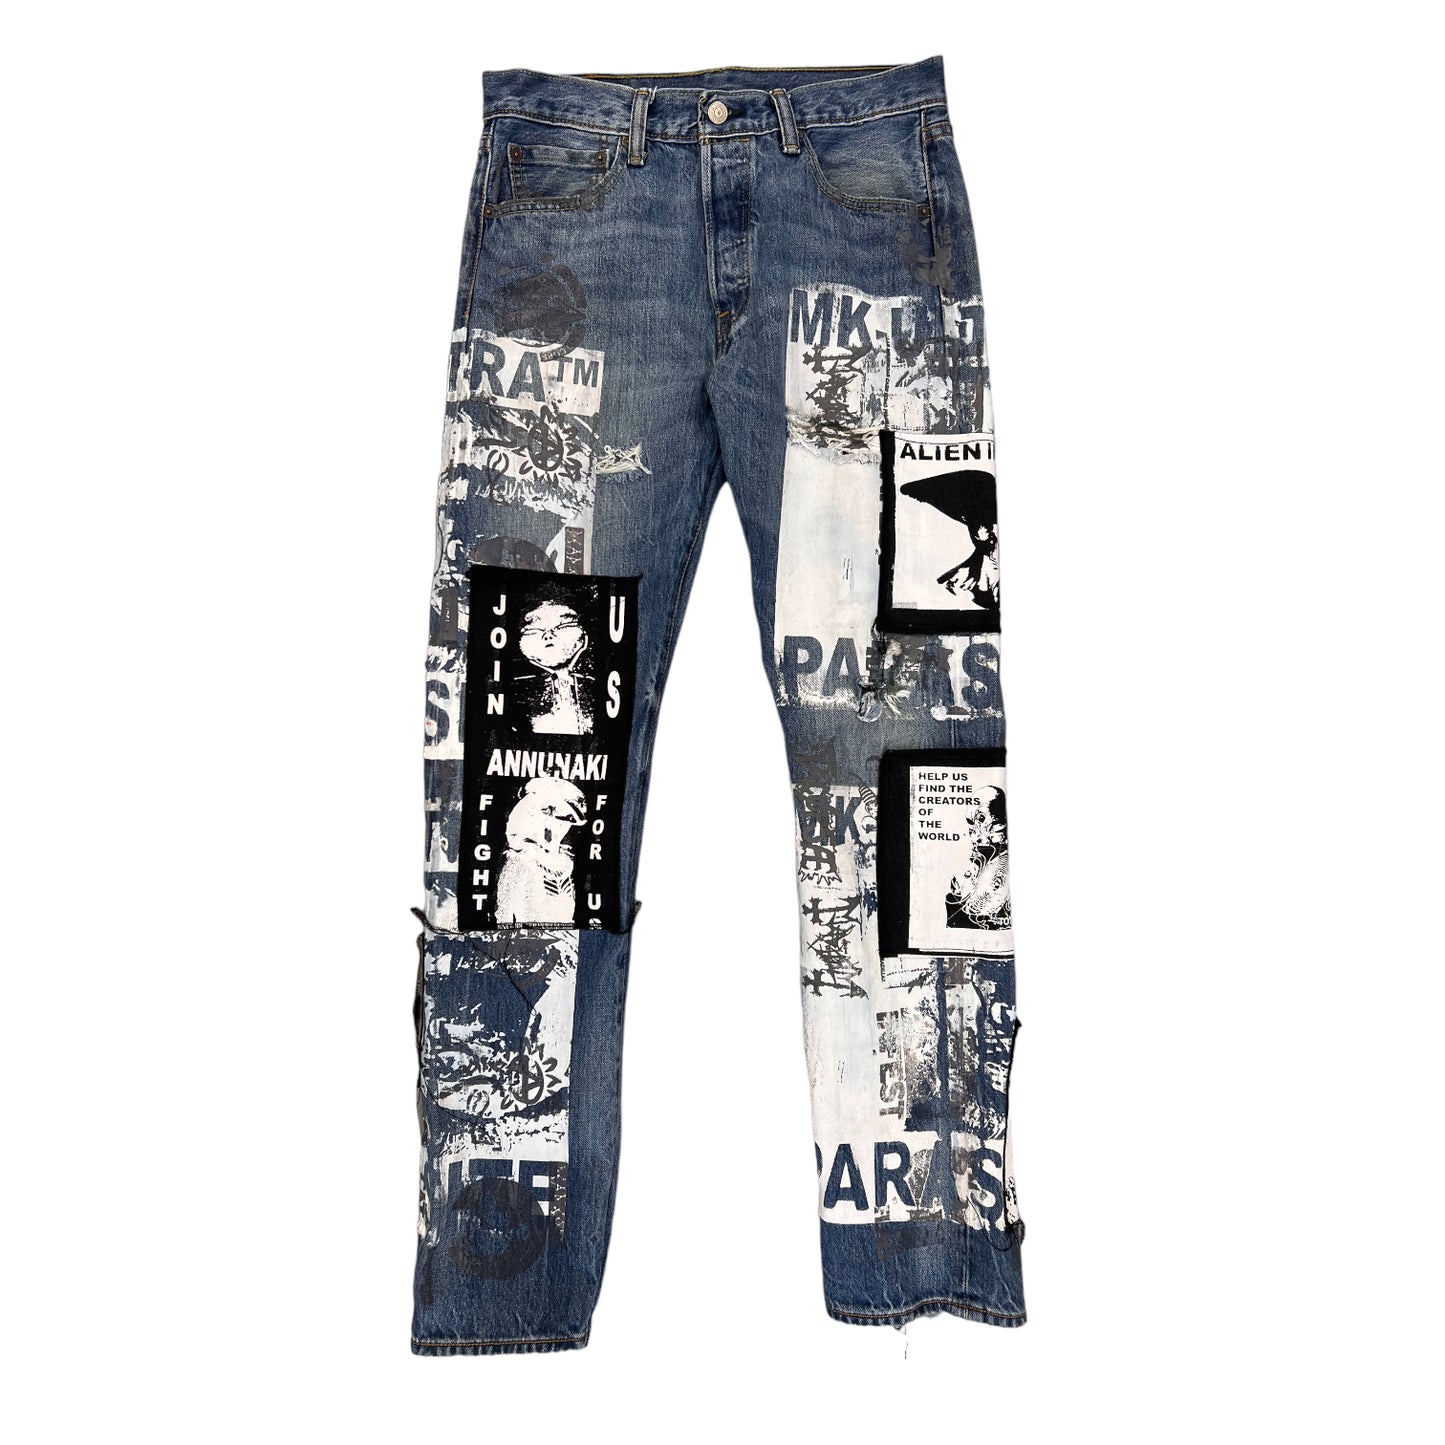 Toth 660 MK-Ultra Parasite Patched denim